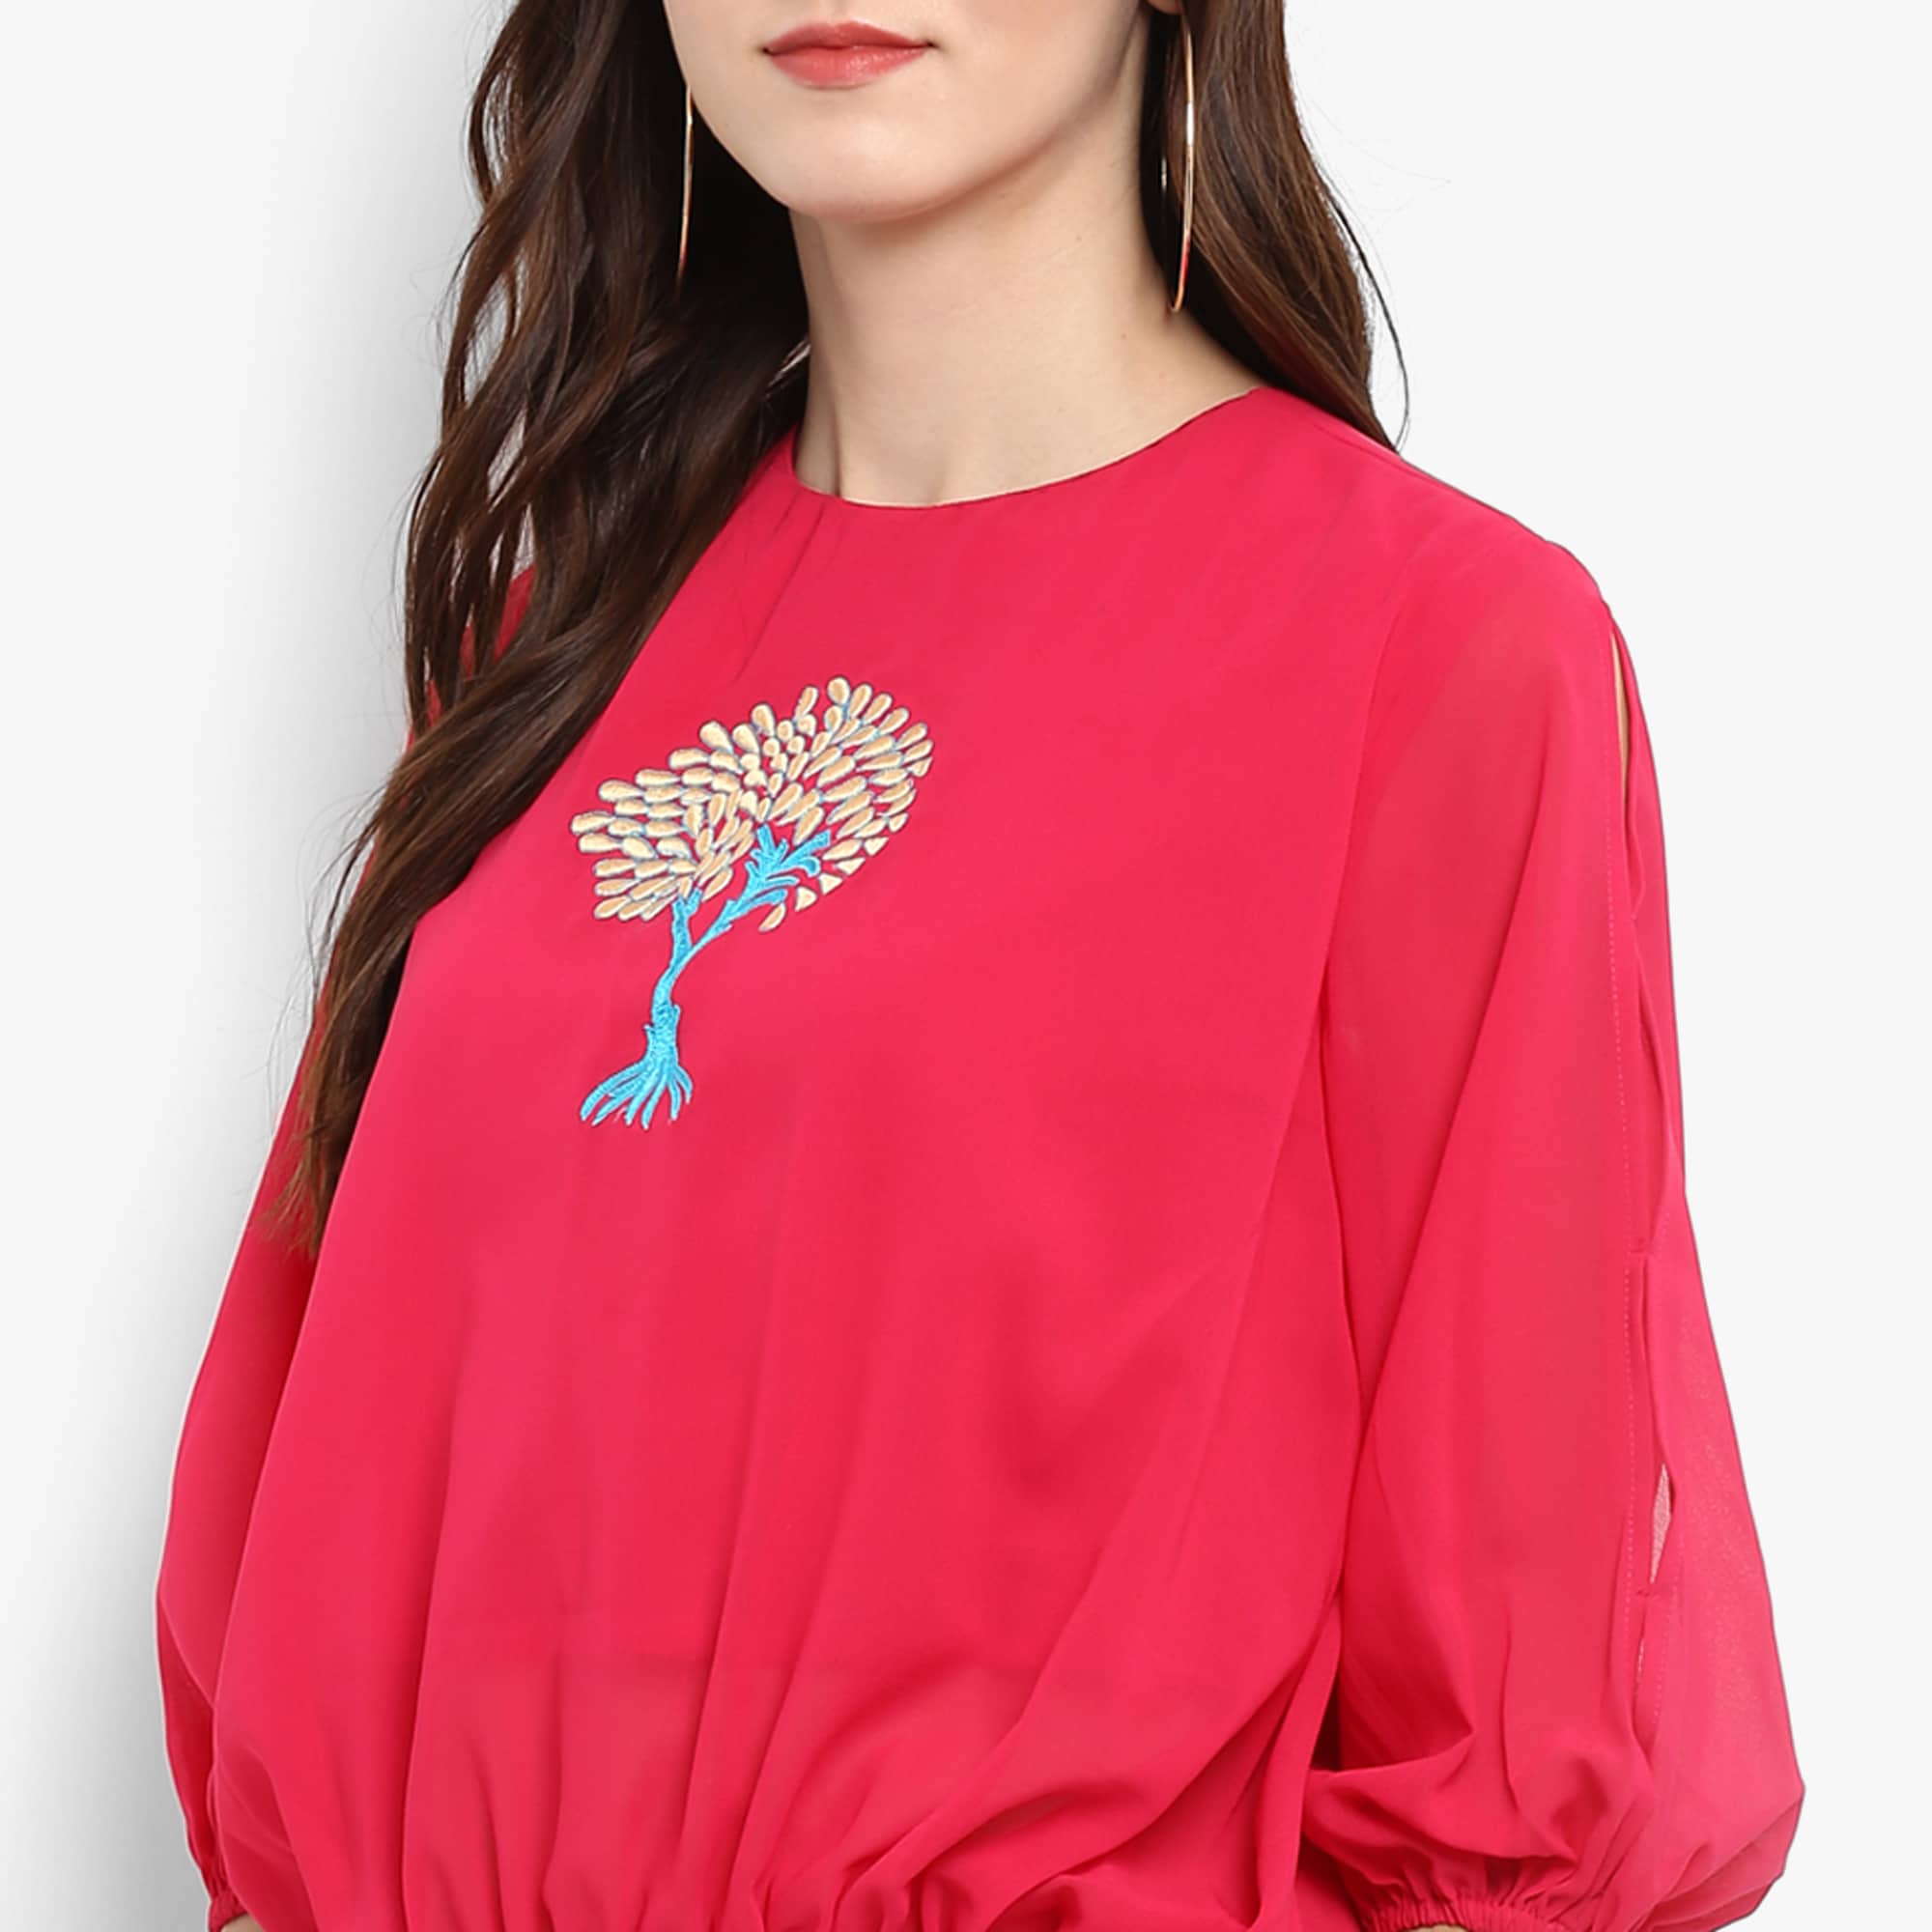 Women's Solid Embroidered Balloon Top - Pannkh